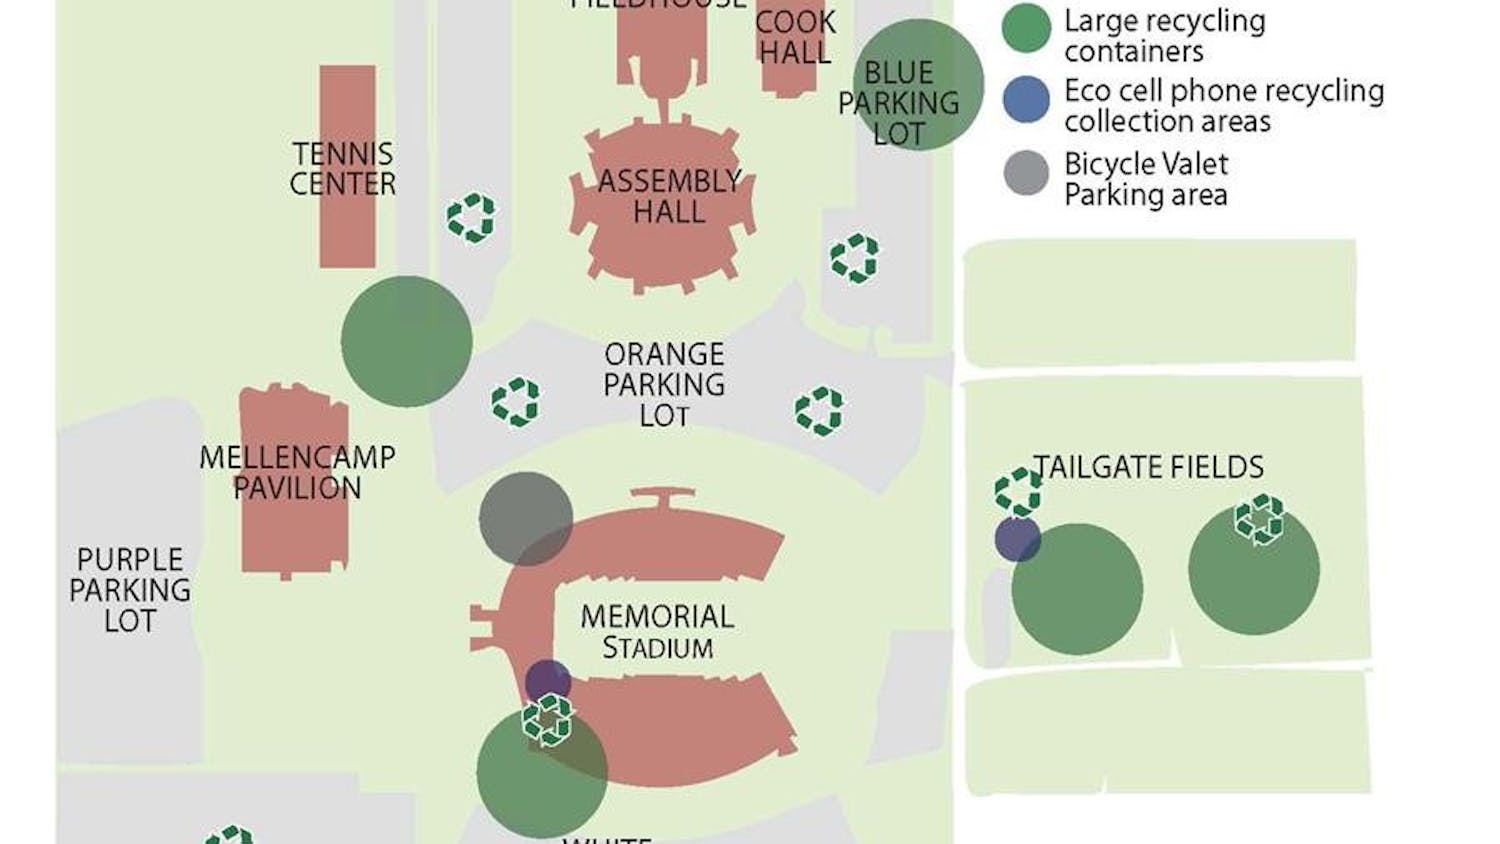 Stadium and tailgate fields recycling areas